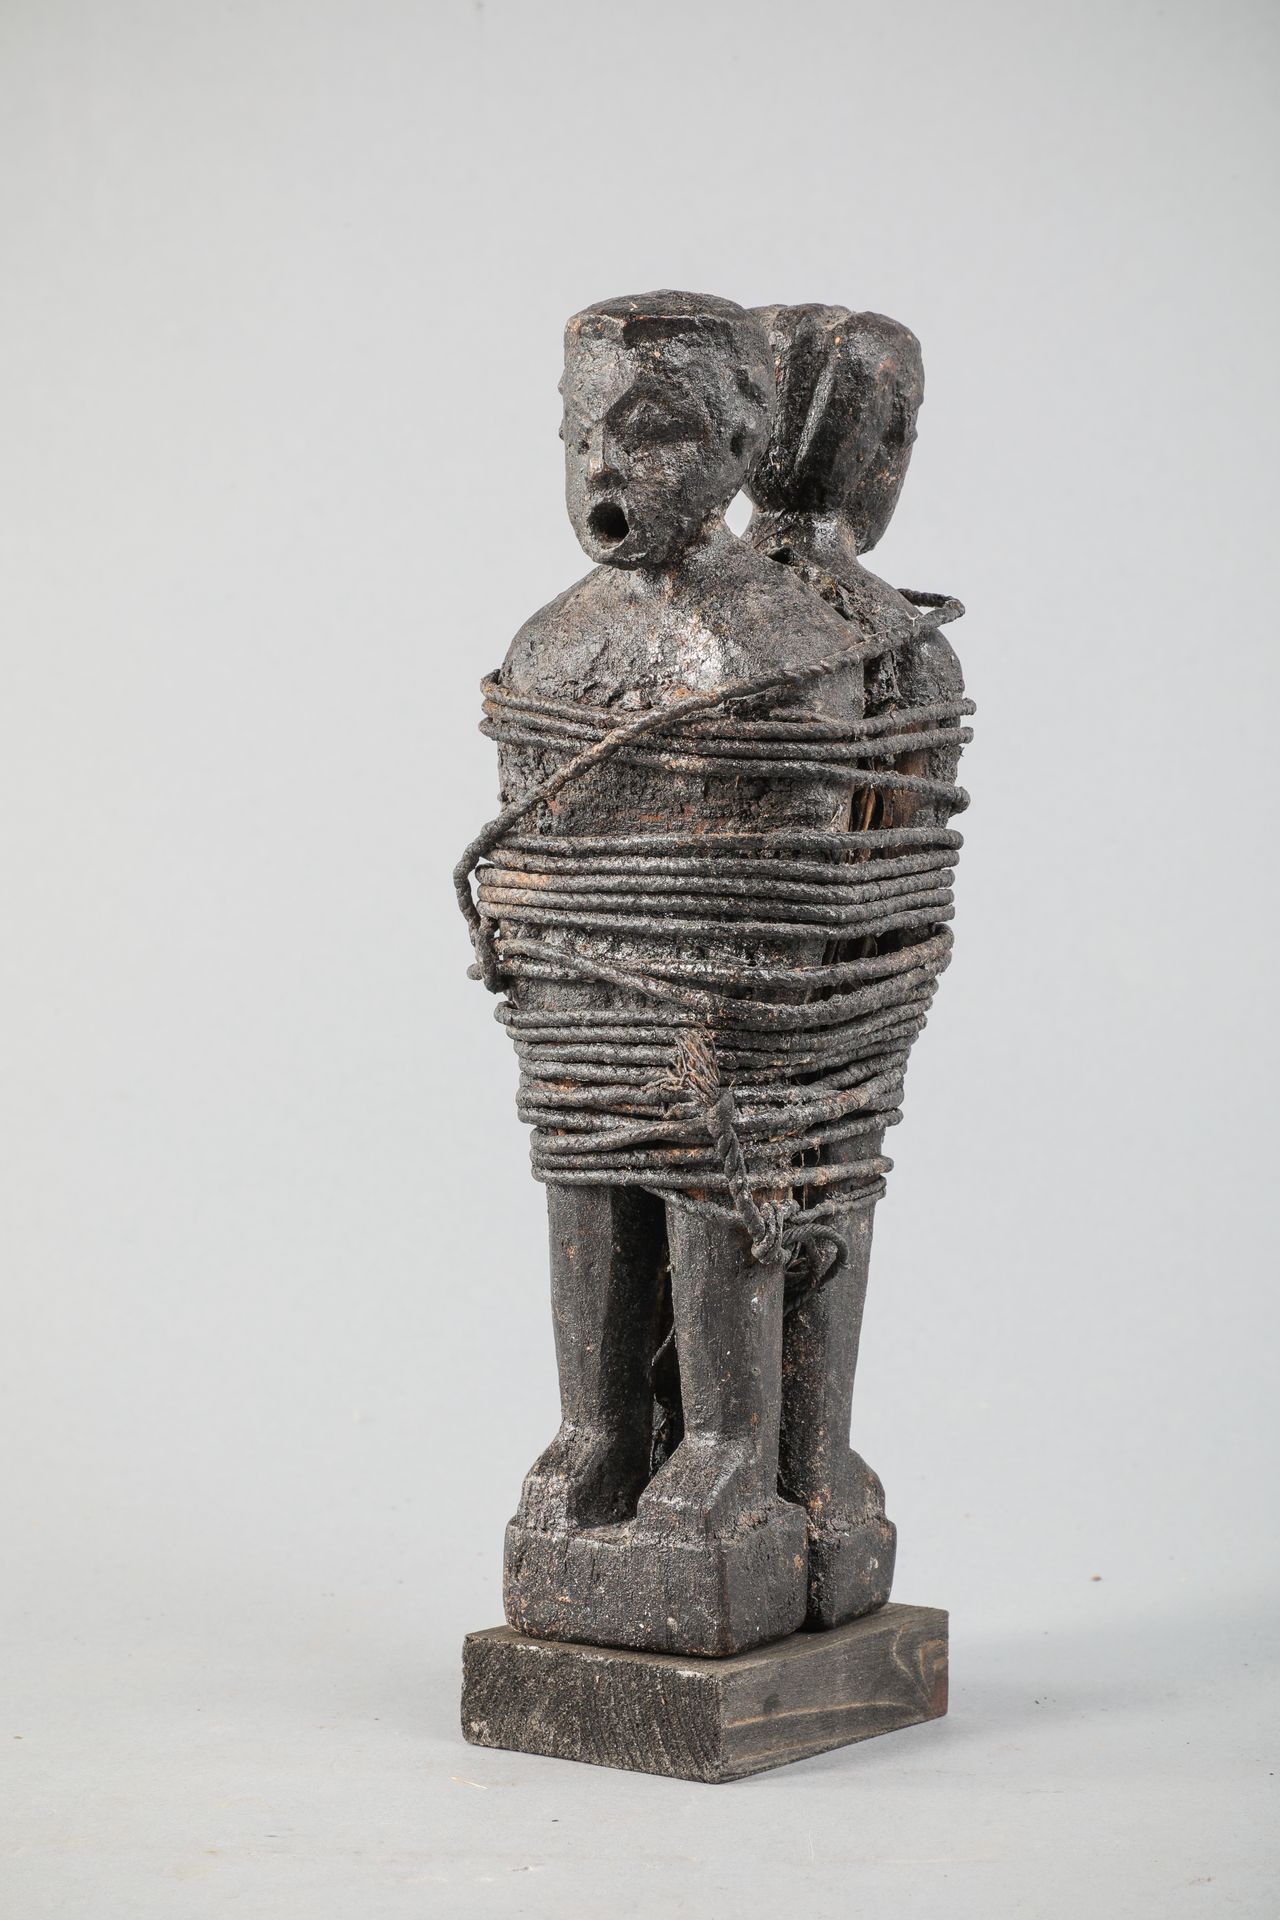 Null Voodoo Fon fetish couple, Benin, showing two figures tied back to back with&hellip;